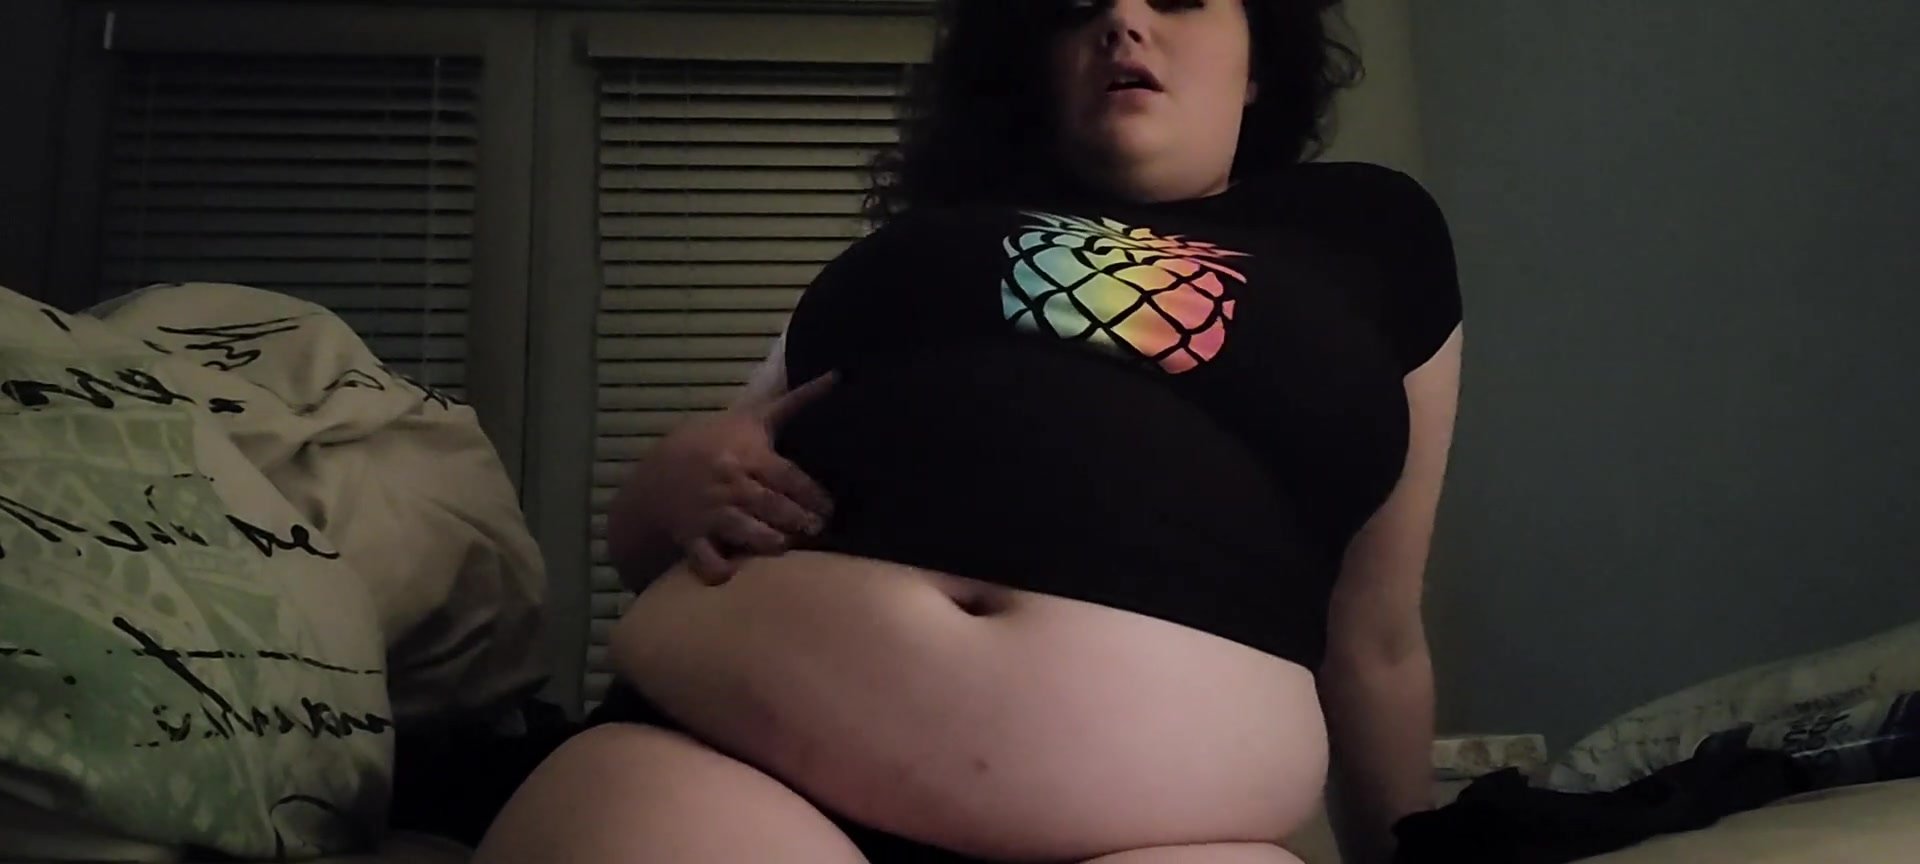 Bbw Feederism Porn - Can't stop eating! - video 2 - ThisVid.com